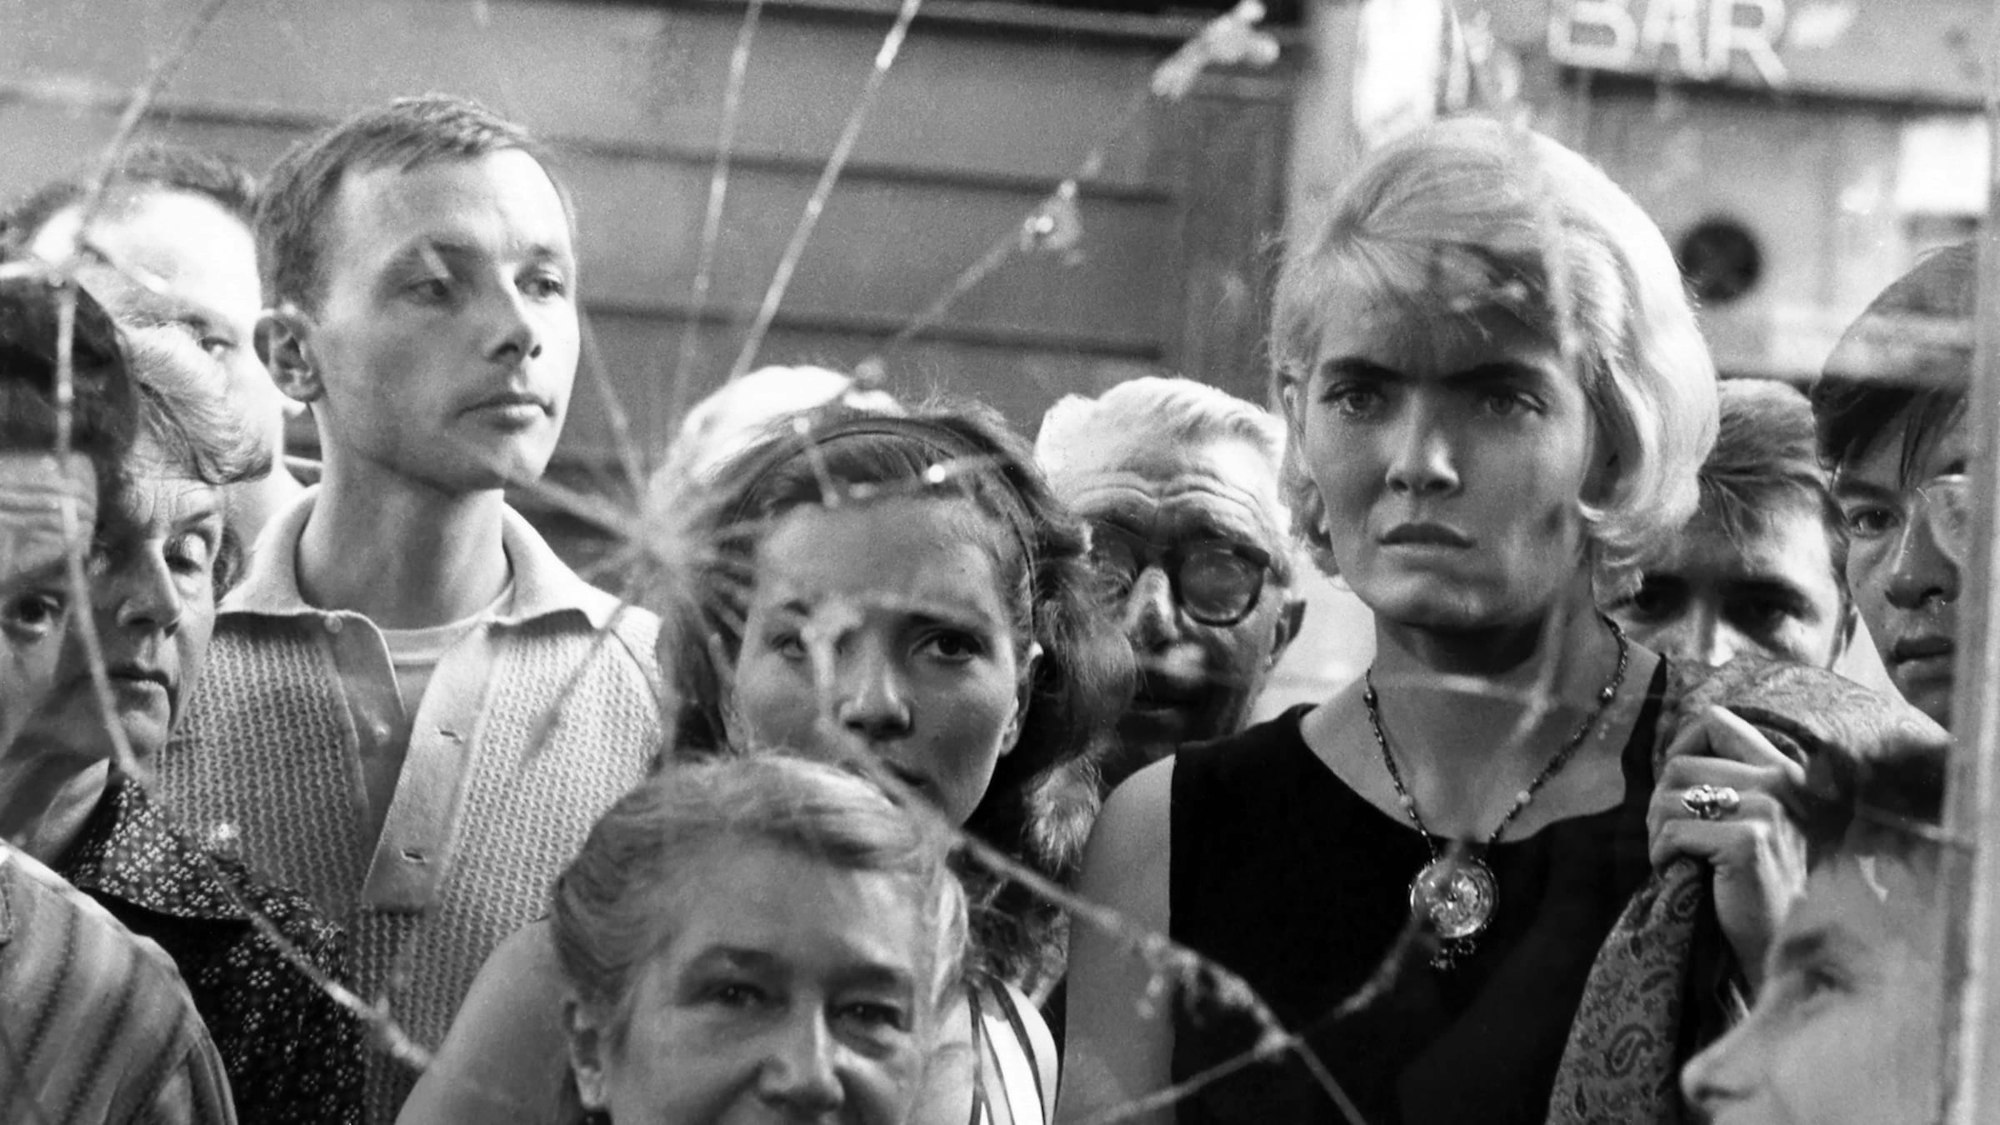 Still from Cleo from 5 to 7 (director Agnés Varda, 1962), photo: courtesy of Institut Francais